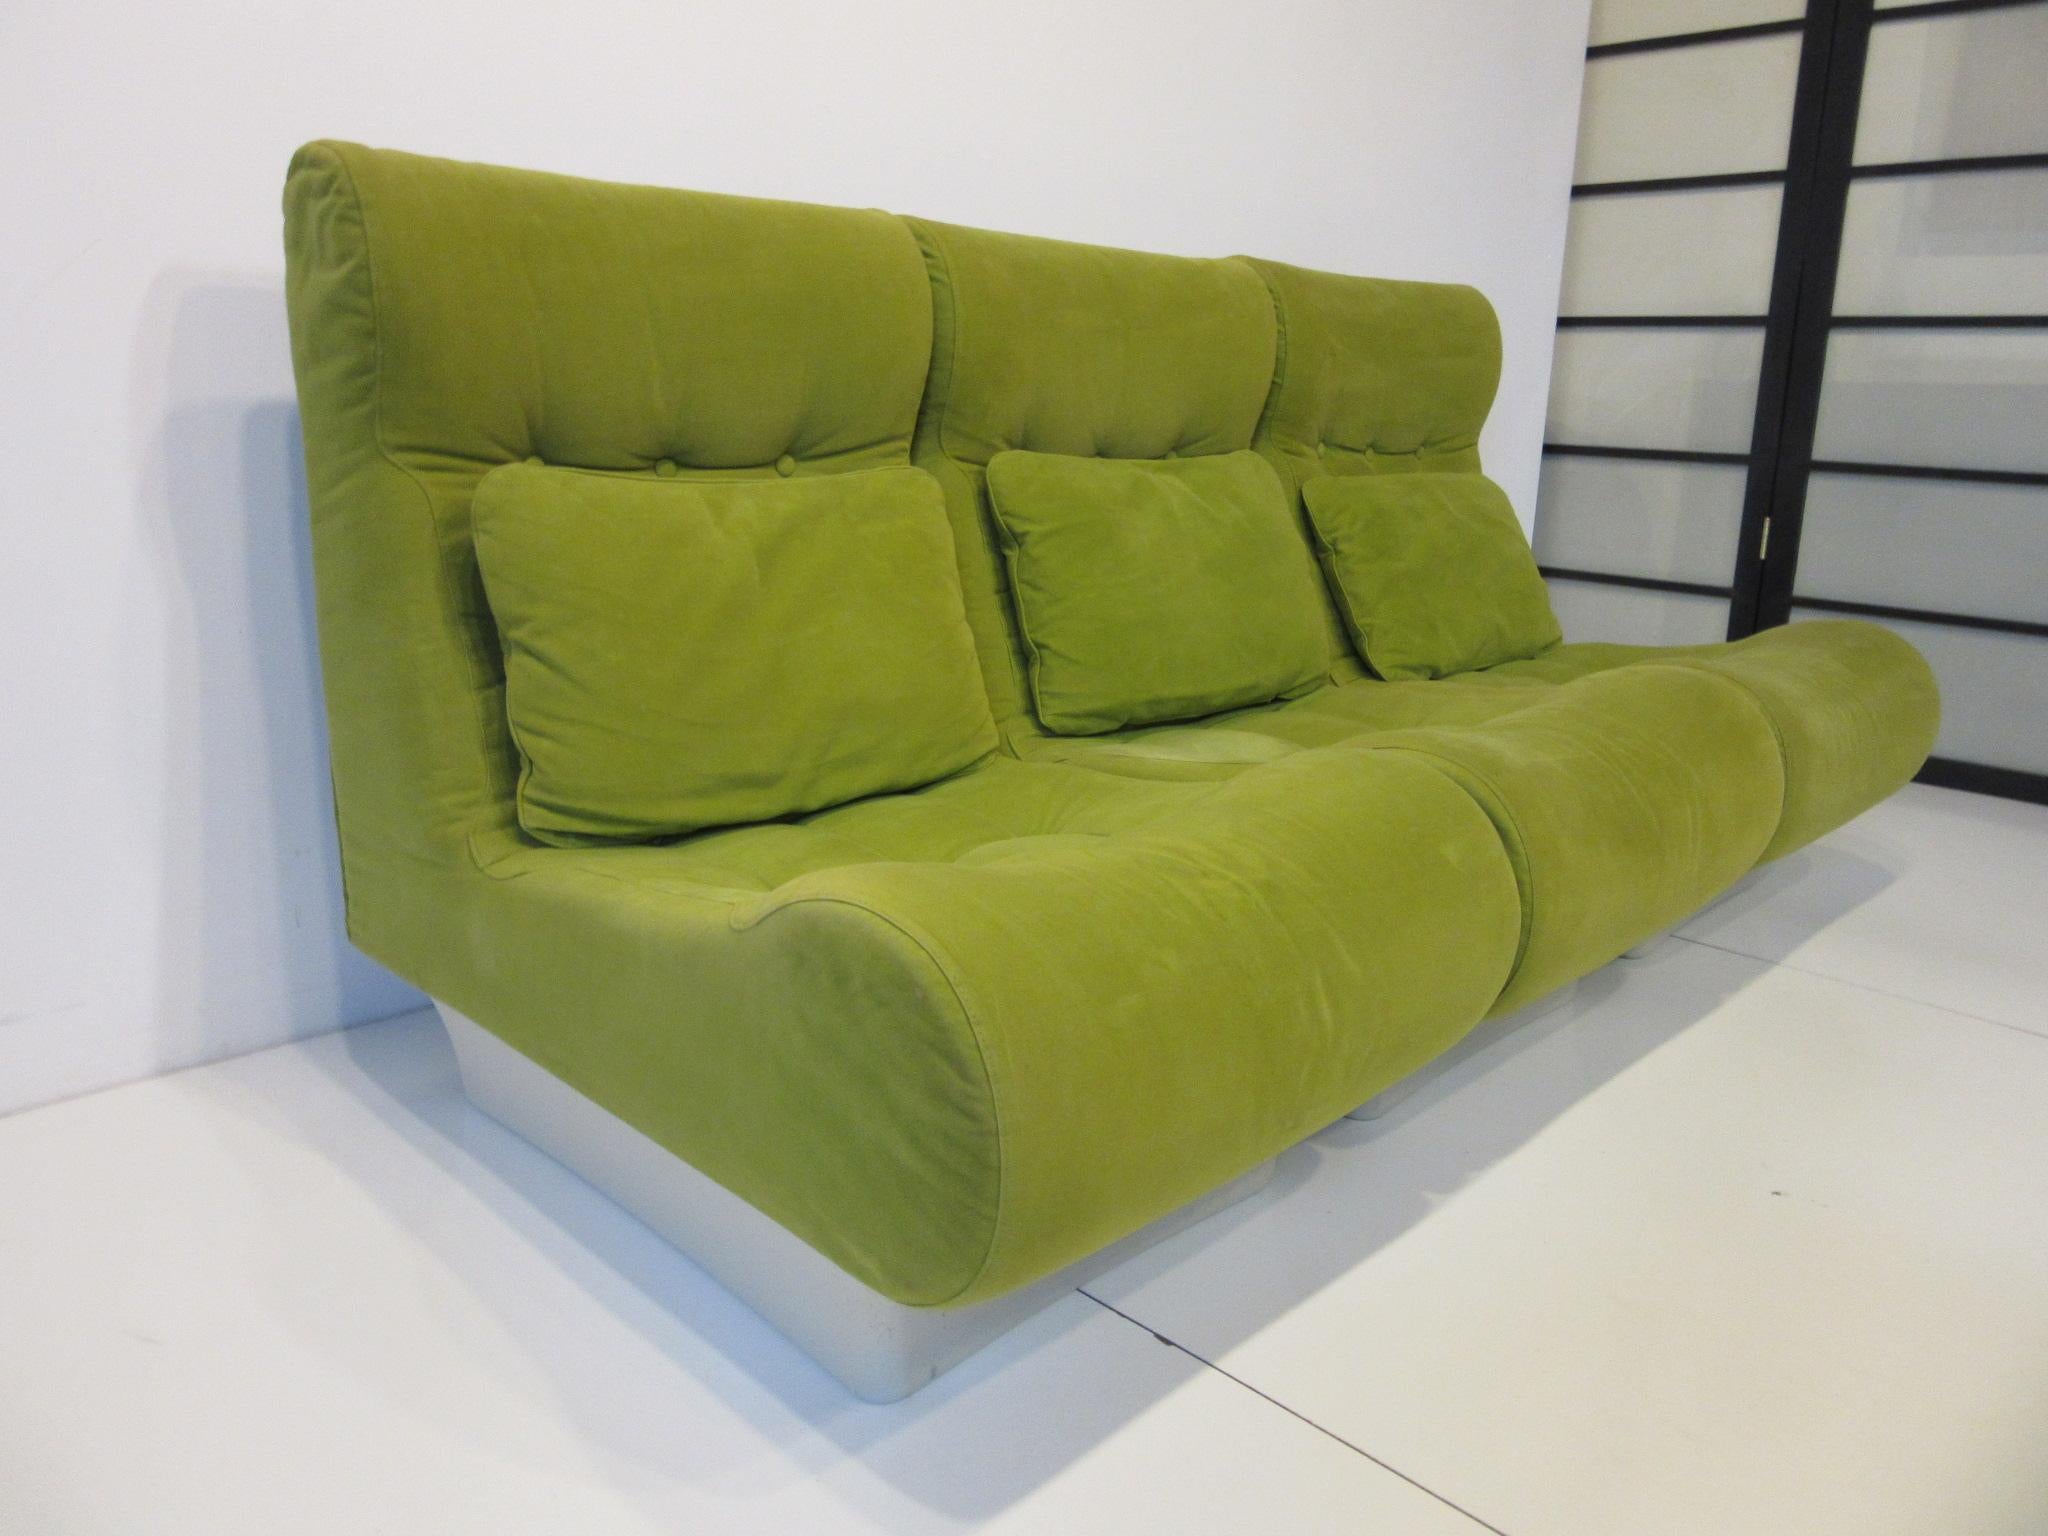 A well-constructed 3 piece loveseat, sofa with matching back pillows, off-white fiberglass bases and stitched design to the seats. The individual sections can be used as lounge chairs when not together and are extremely comfortable covered in a soft